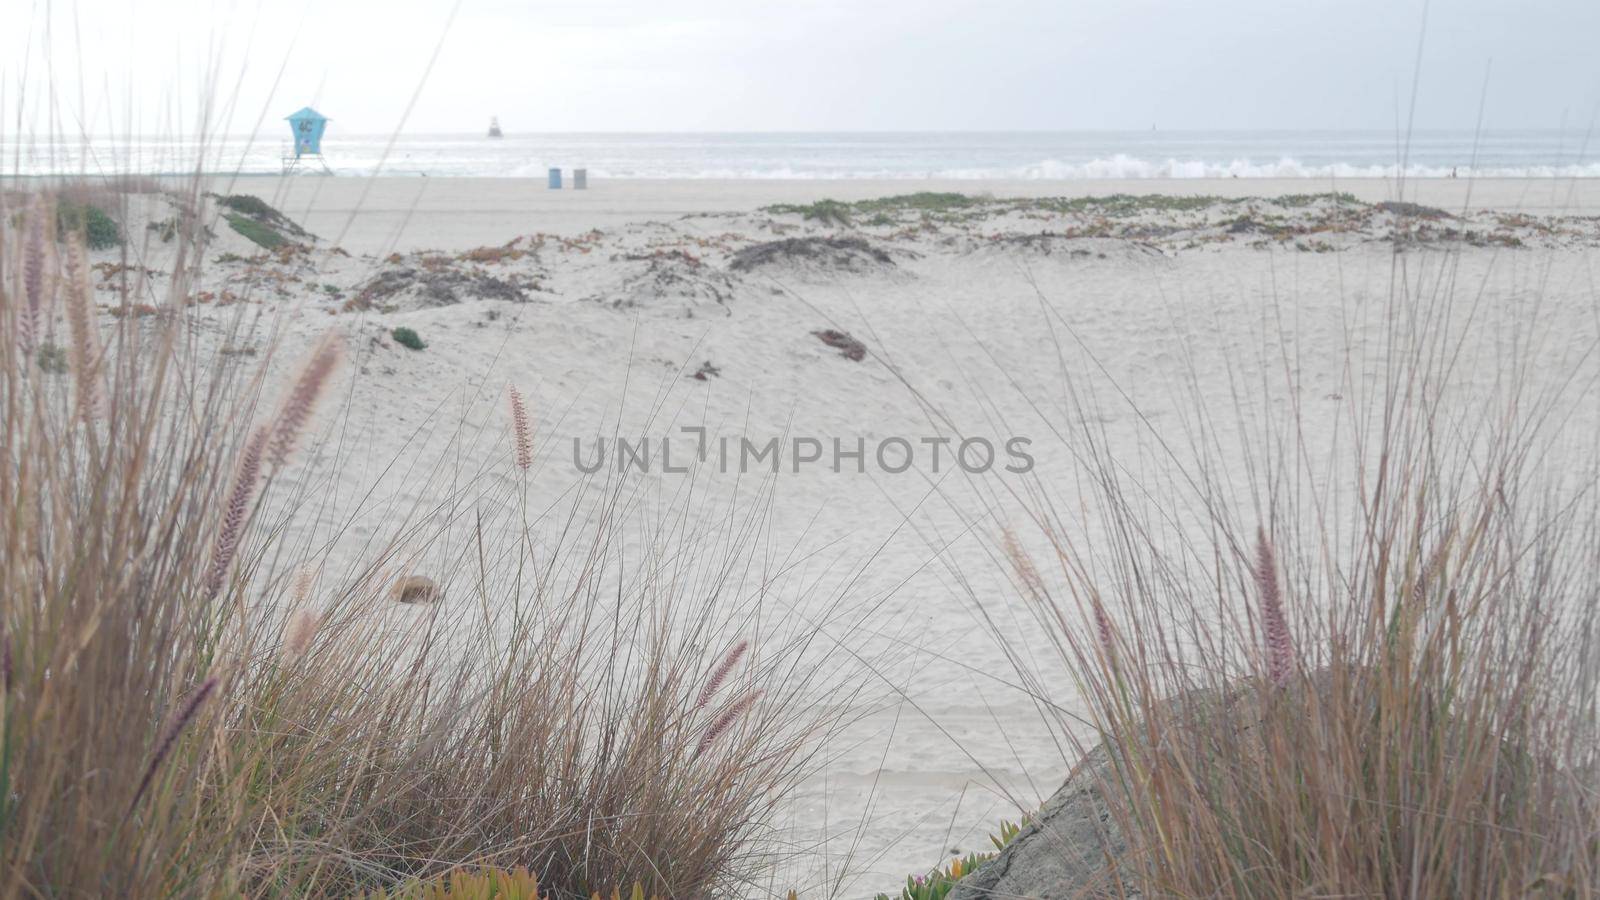 Sand dunes of misty Coronado beach, ocean waves in fog, California coast, USA. Cloudy overcast weather in San Diego. Succulent plant on sea shore in brume, lifeguard tower in haze. Life guard stand.